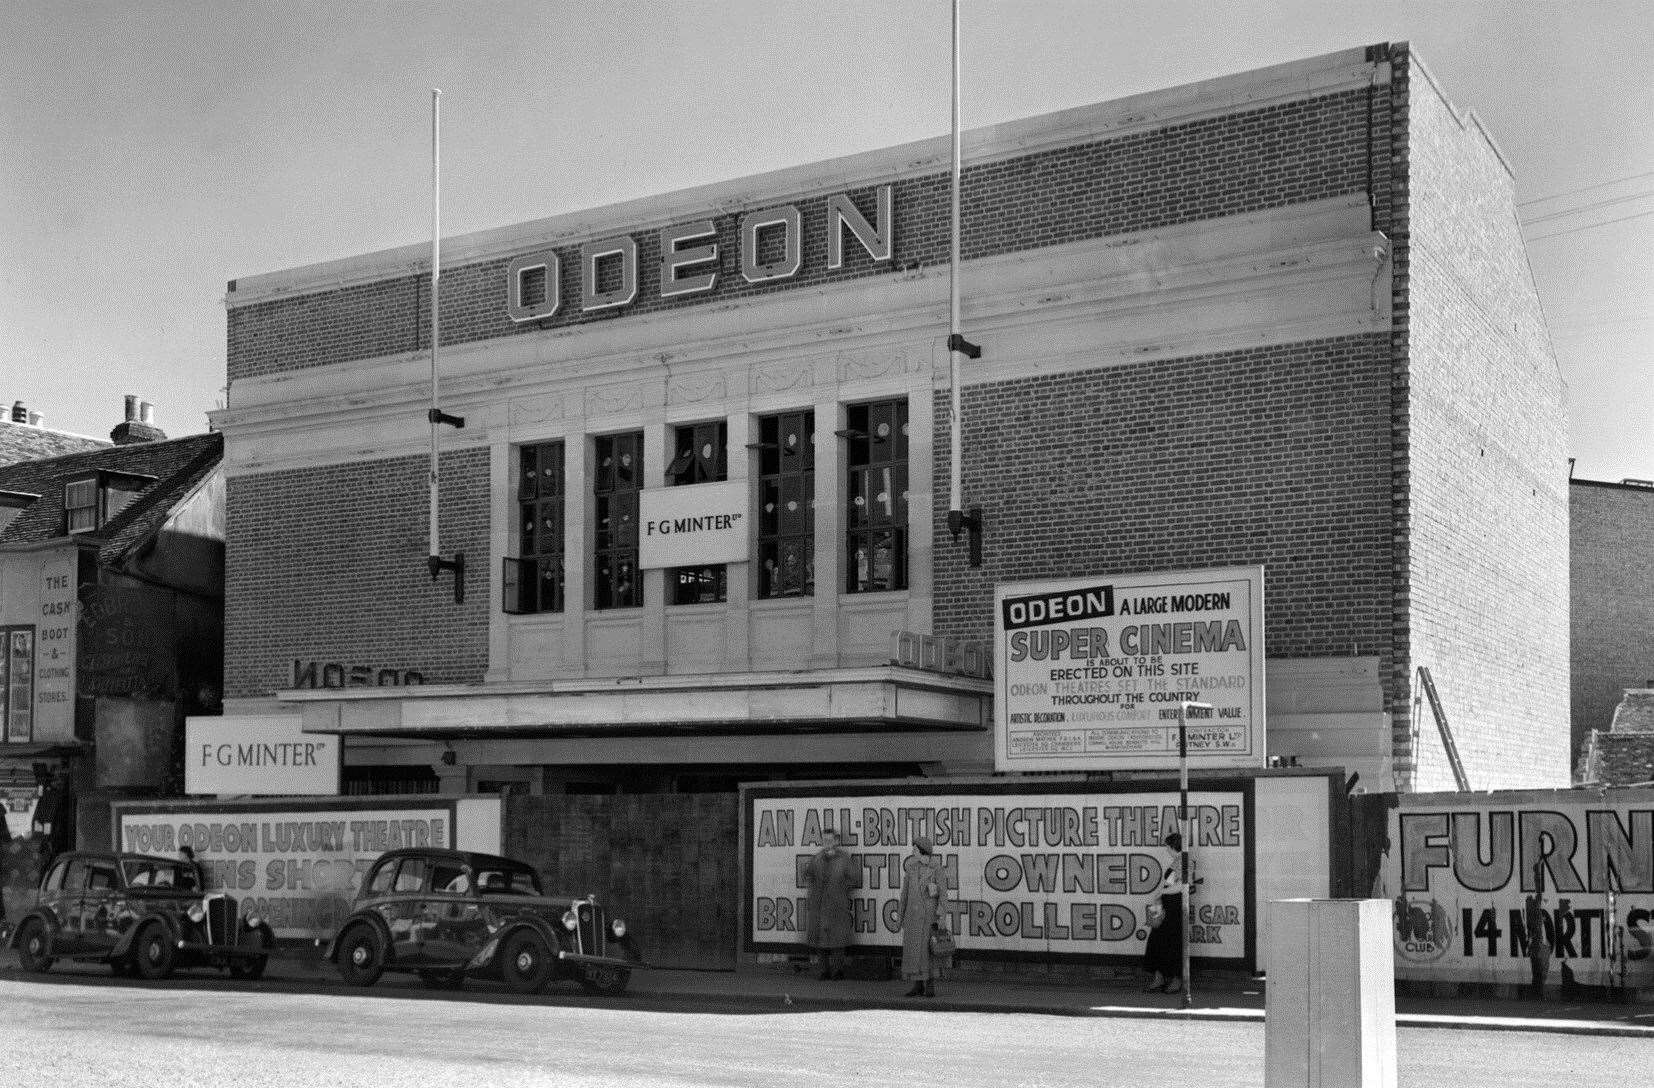 The Odeon in its early years